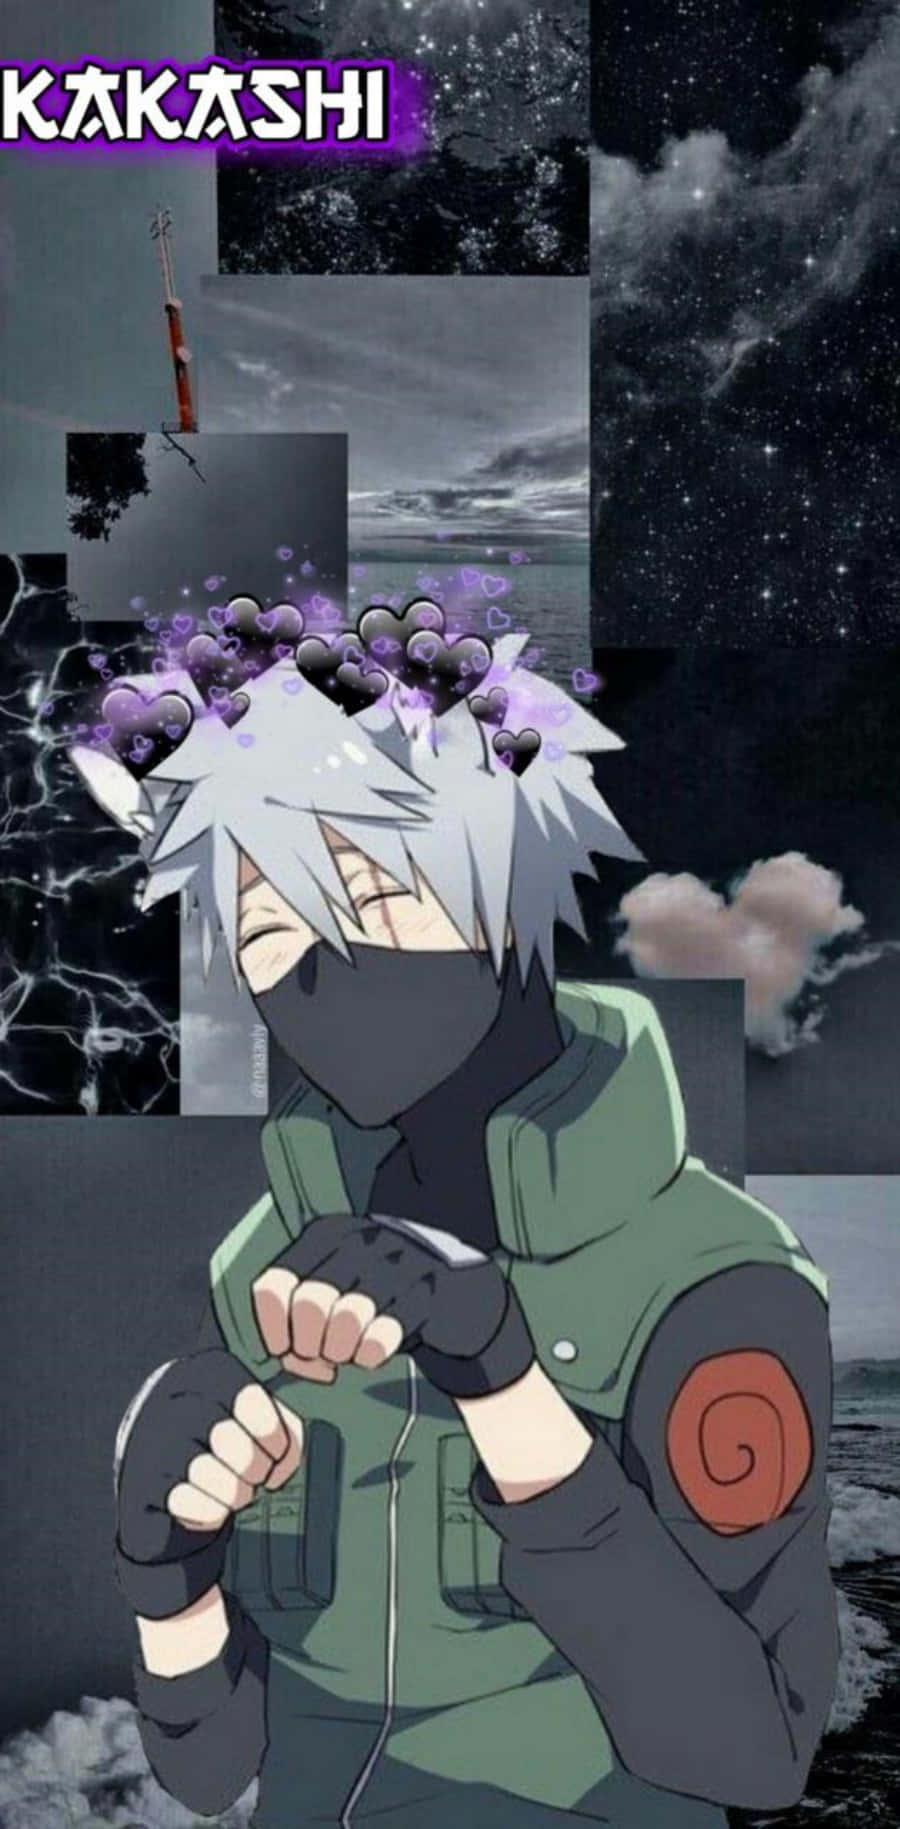 Lindokakashi (referring To The Wallpaper Featuring The Character Kakashi From The Anime 